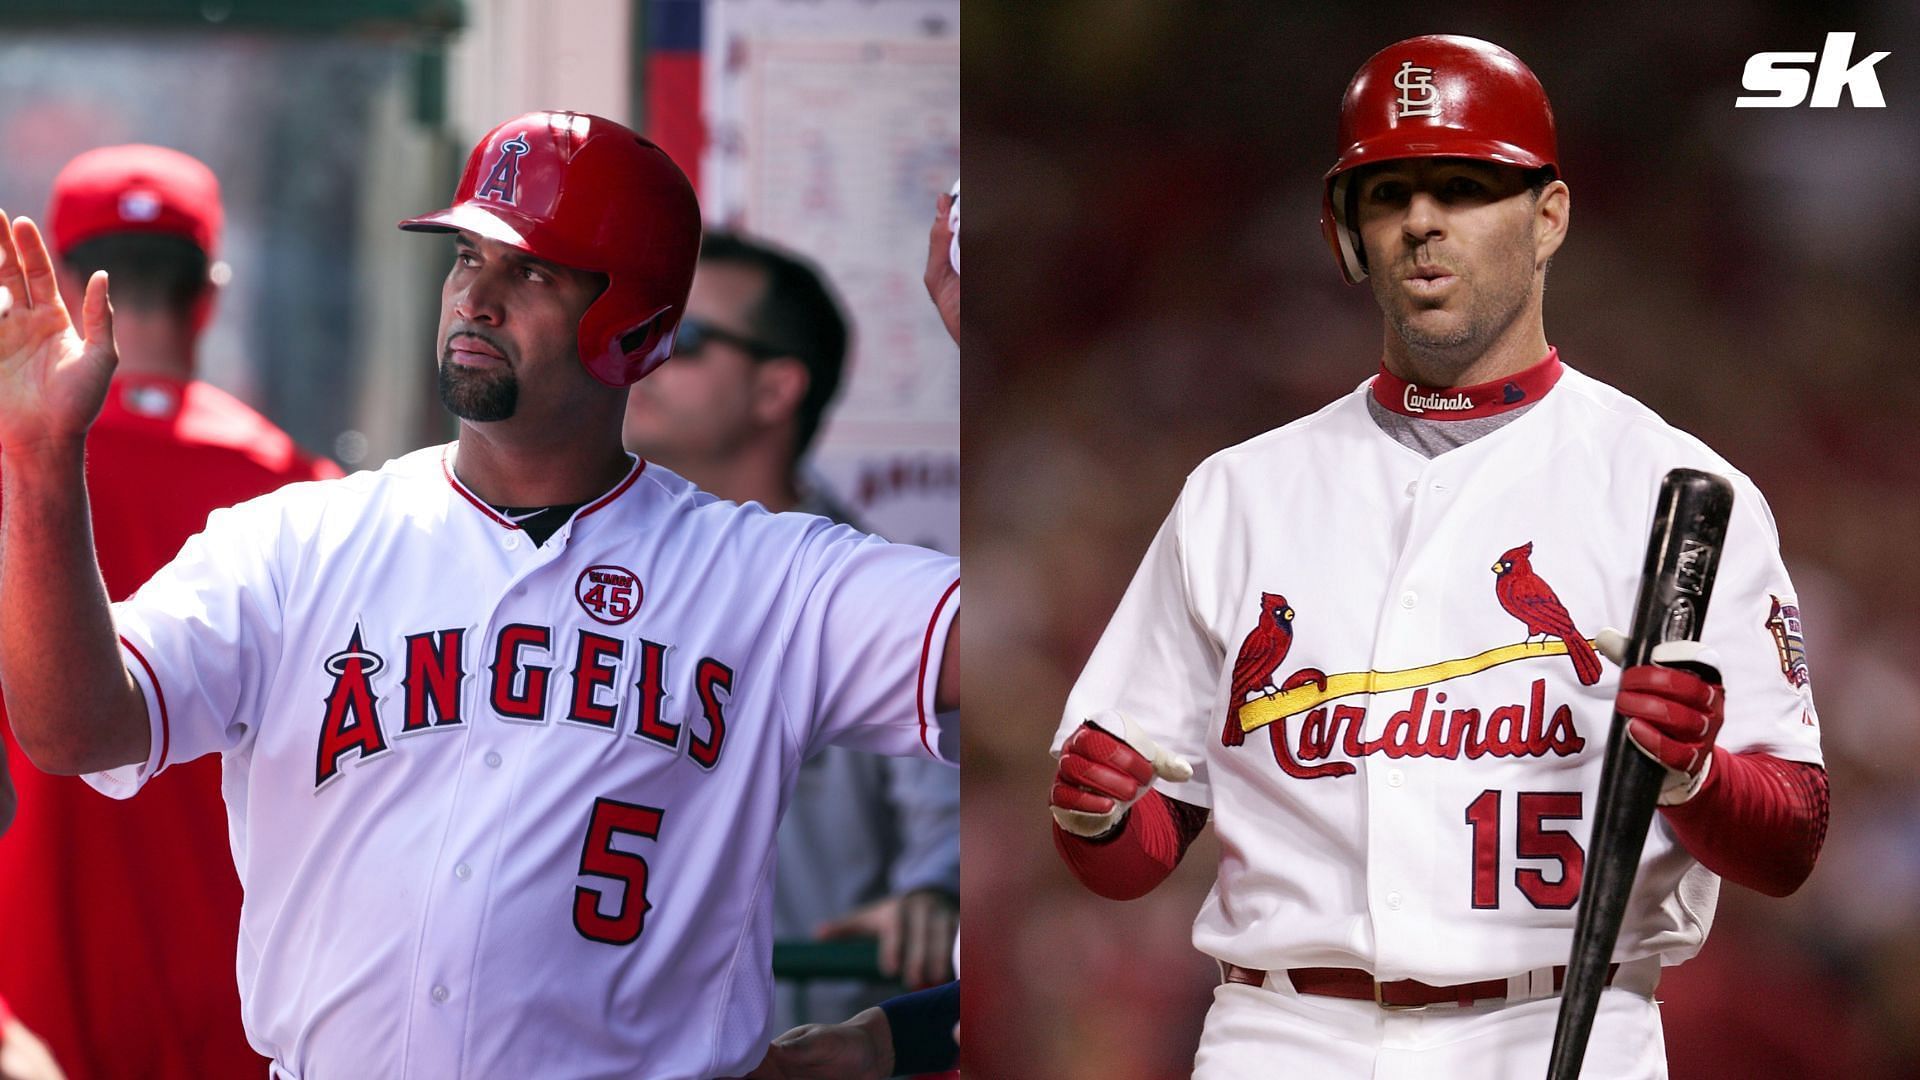 Which Cardinals players have also played for the Angels? MLB